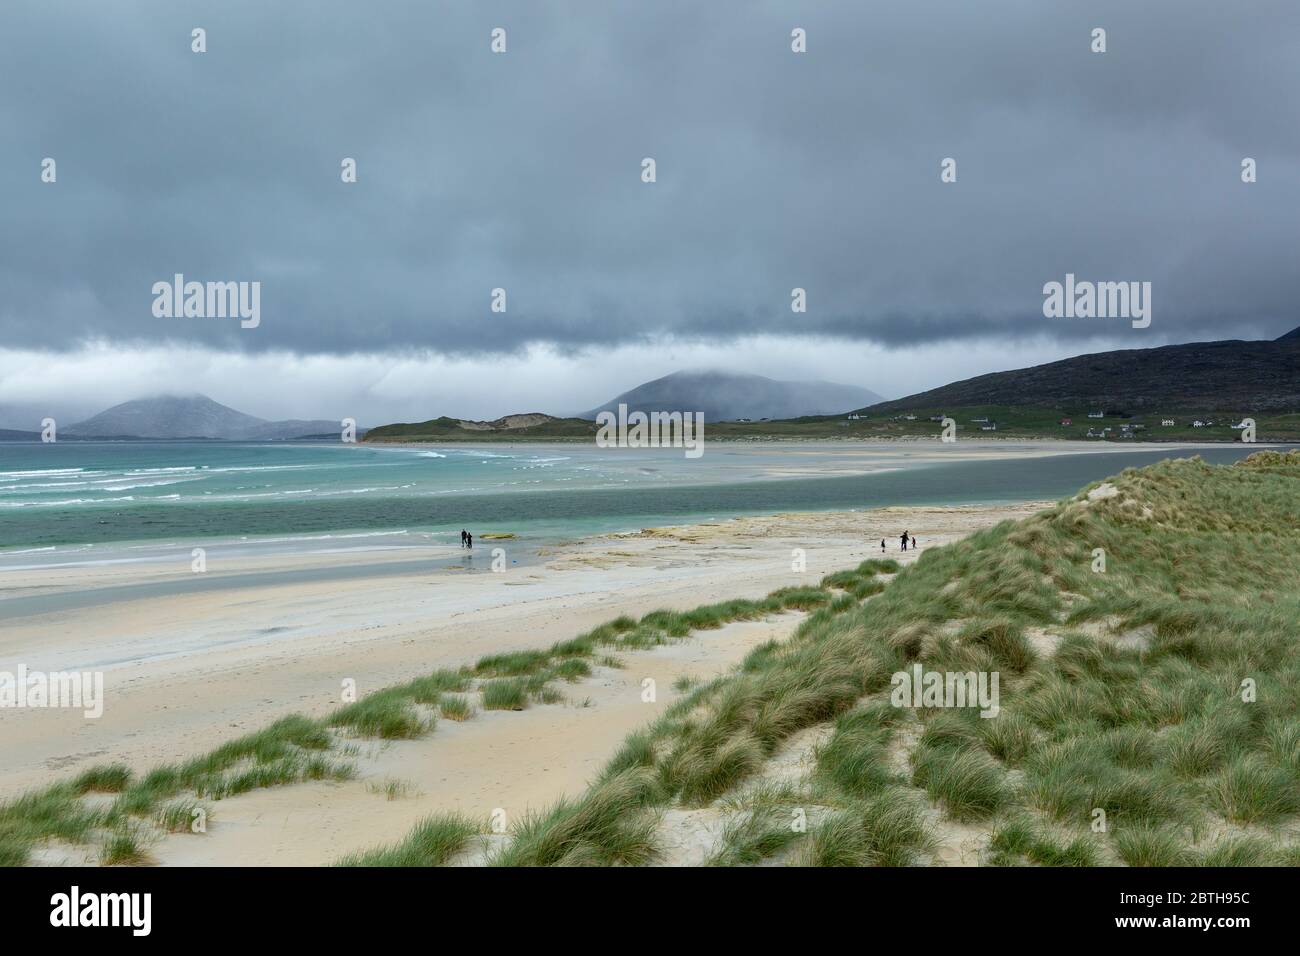 Adults and children on the beach at Seilebost during blustery weather, Isle of Harris, Outer Hebrides, Scotland Stock Photo